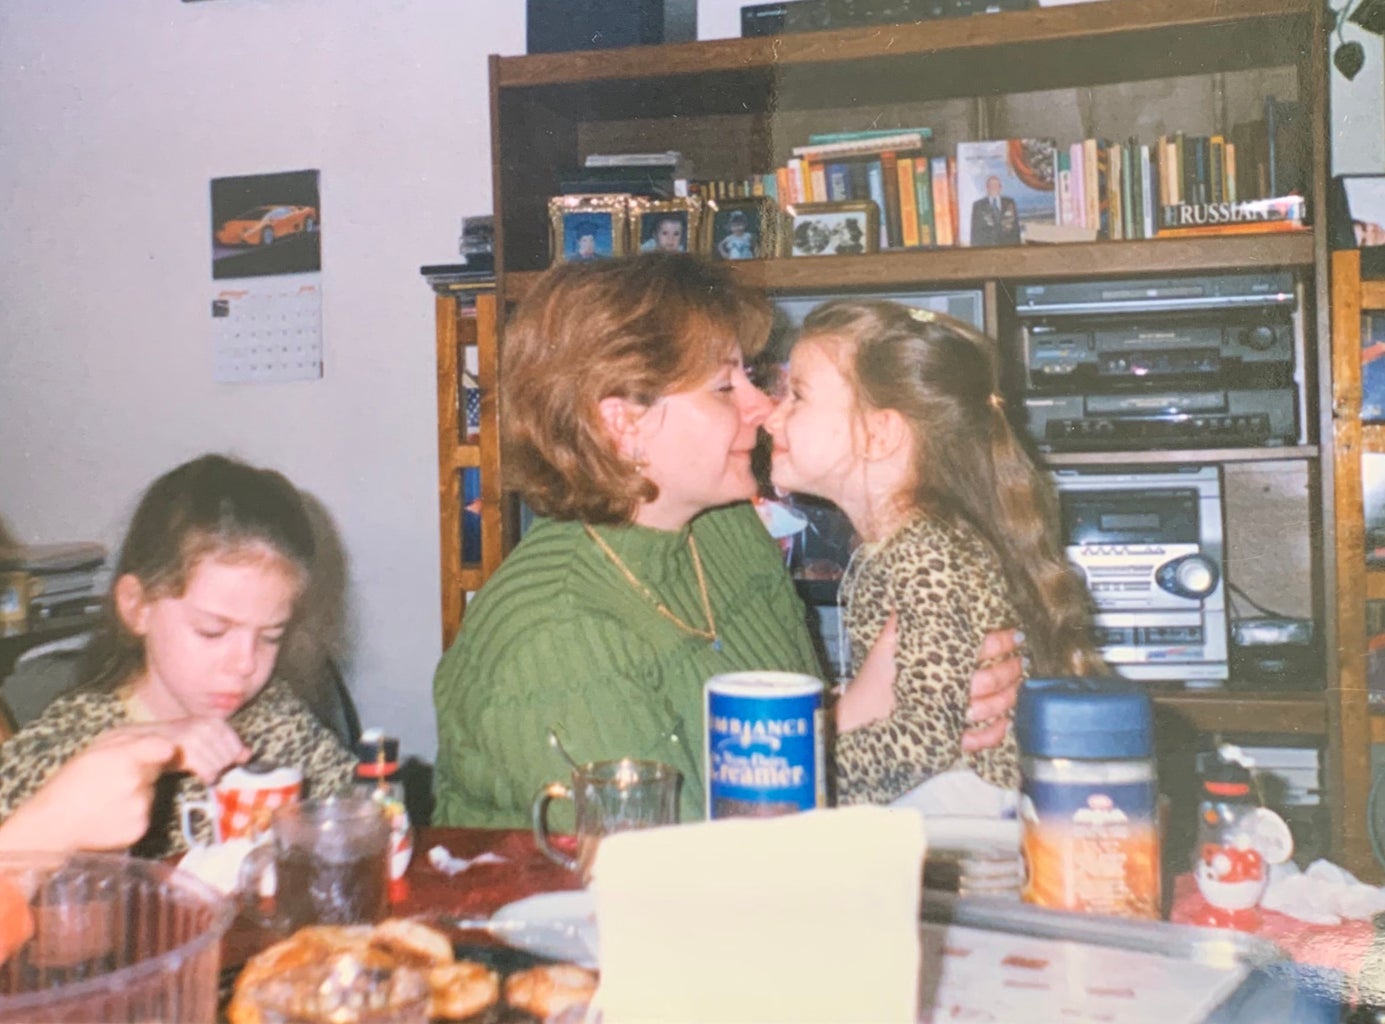 A picture of my mom and sister 16 years ago